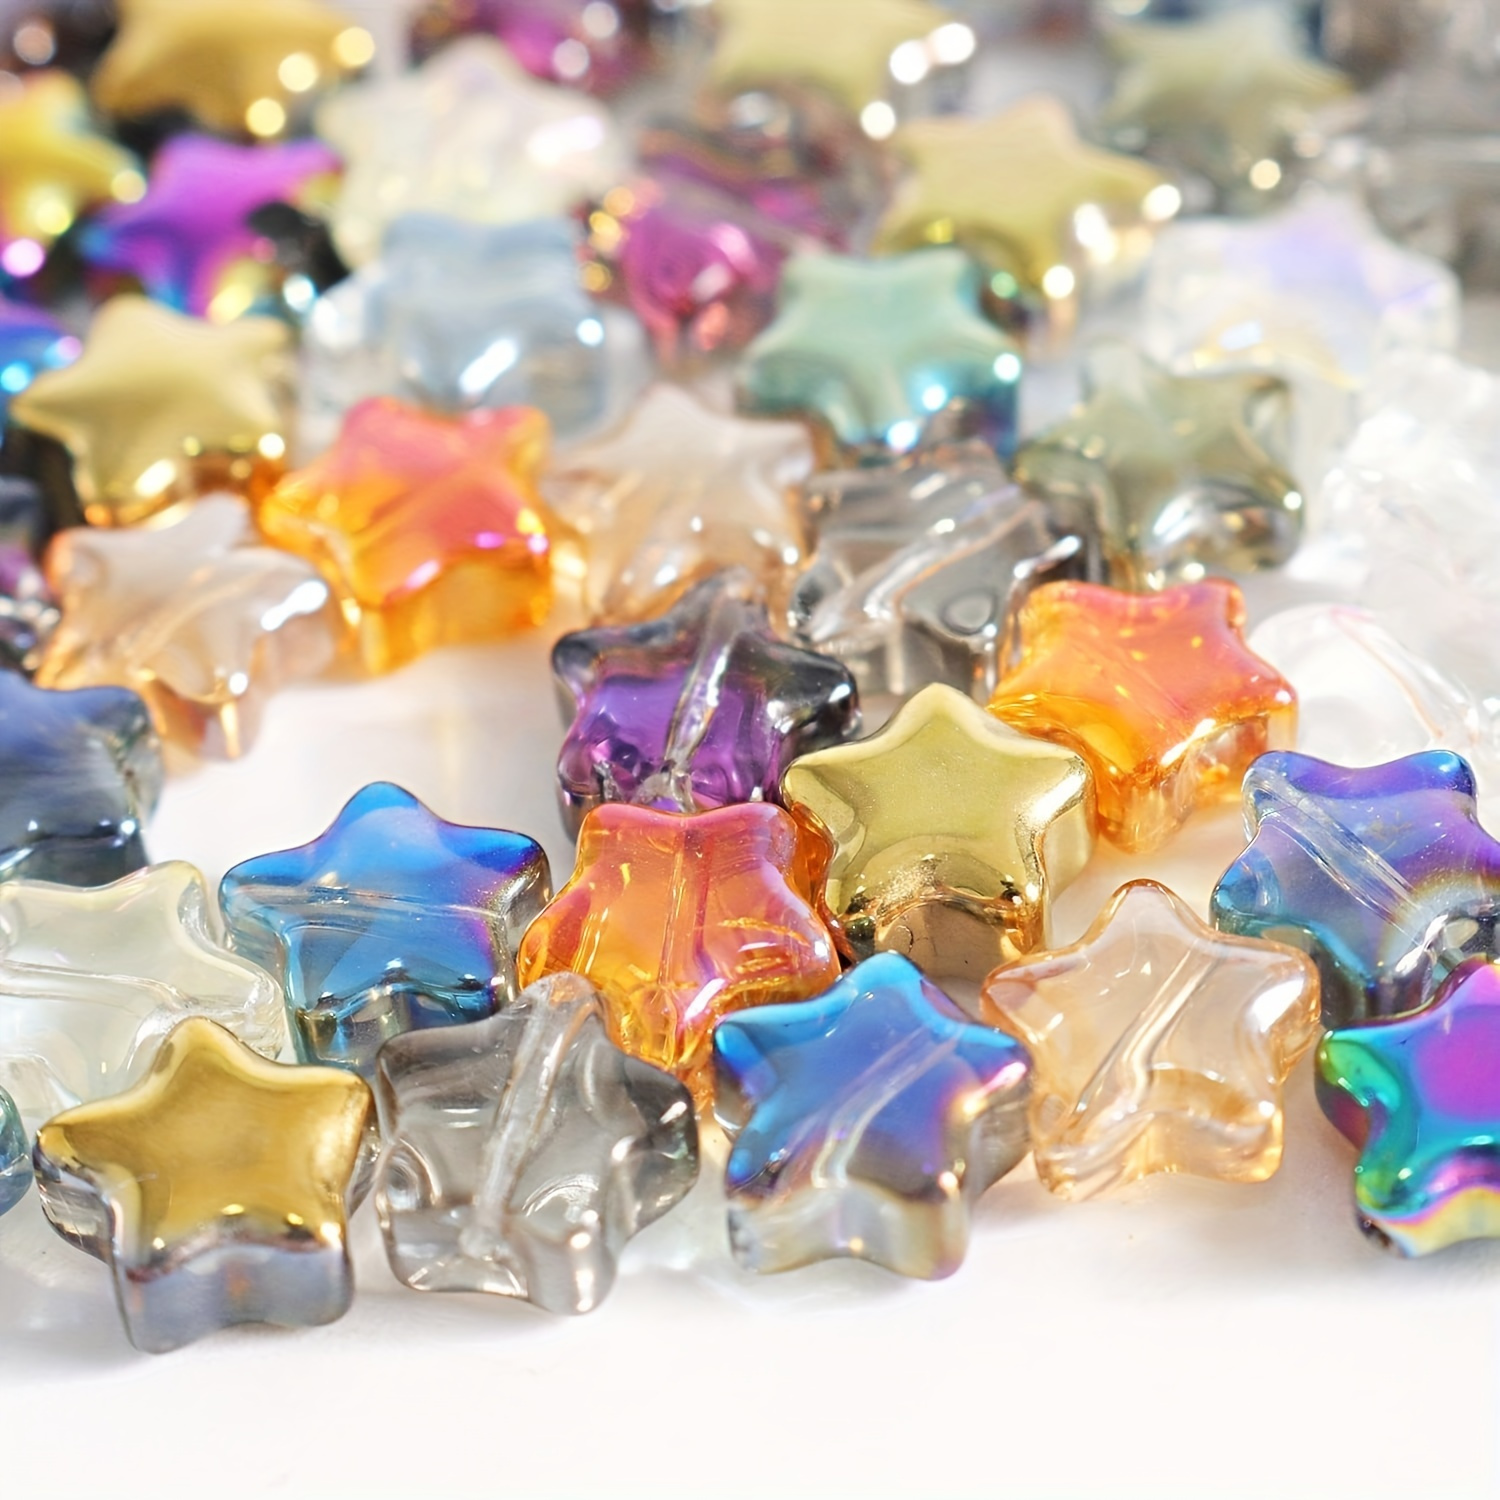 

100pcs 8mm Diy Star-shaped Beads Star-shaped Glass Spacer Beads Colored Star-shaped Beads For Handmade Jewelry Bracelet Necklace Making For Eid